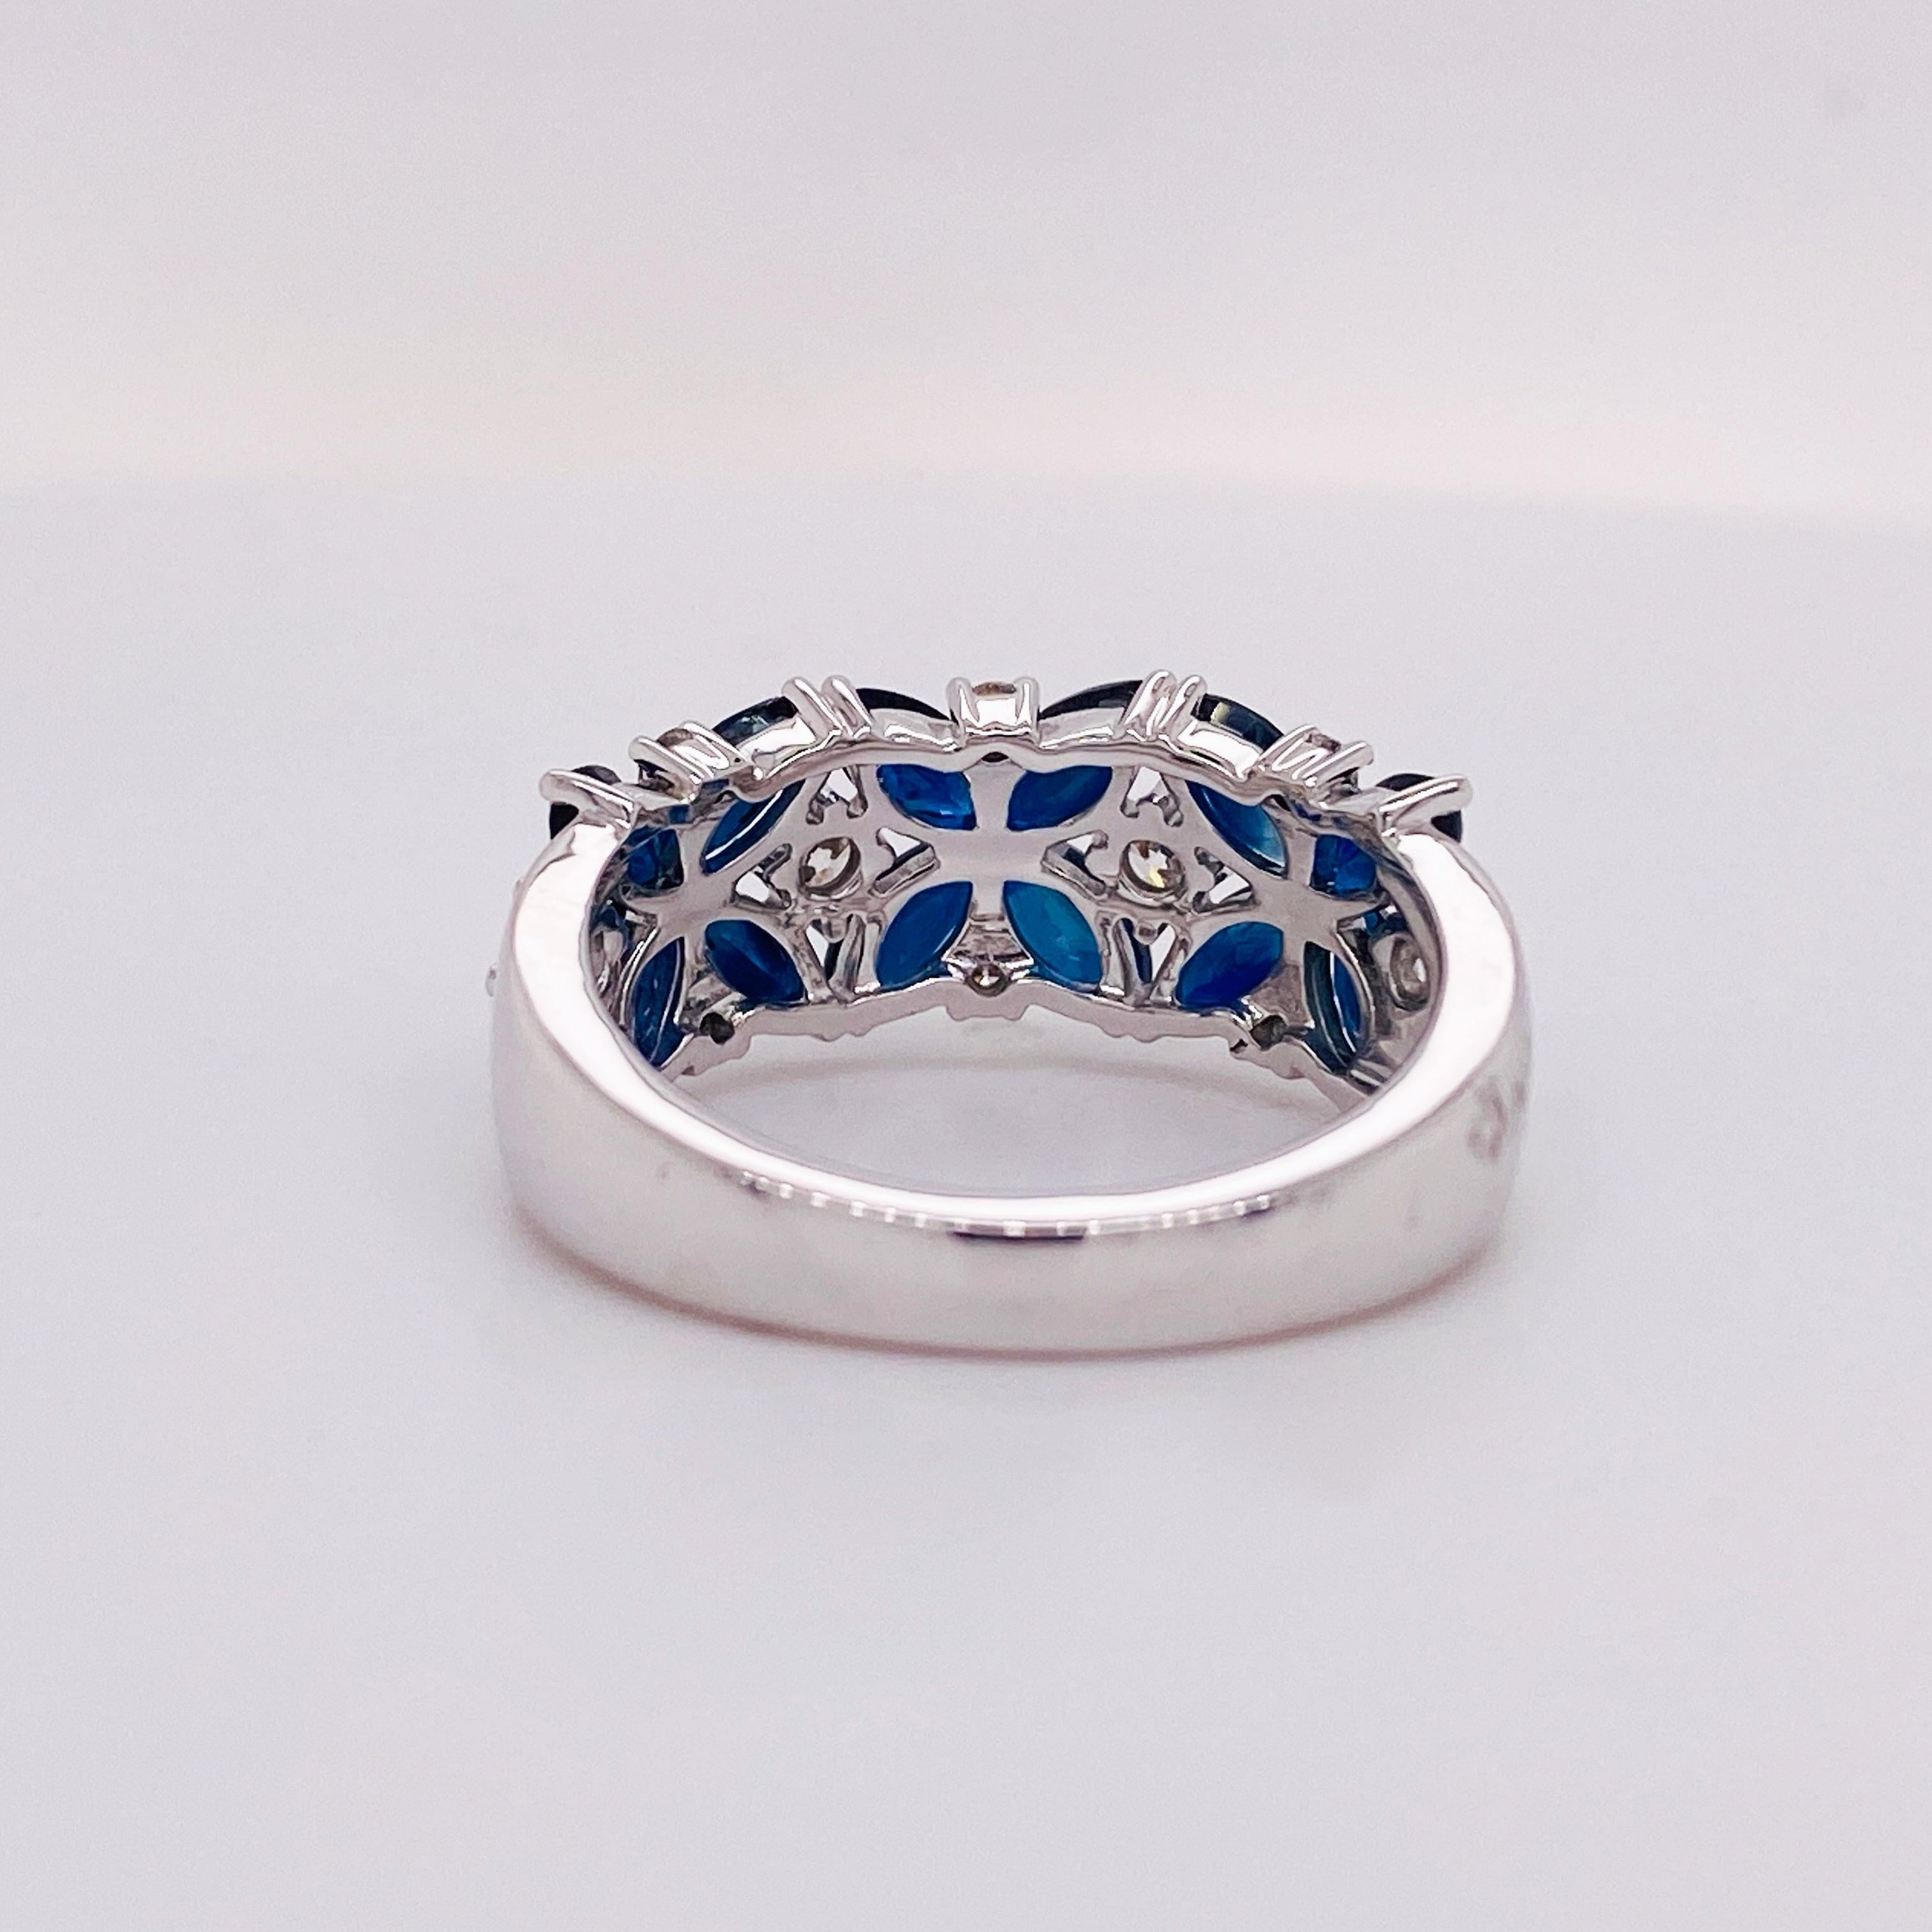 For Sale:  Rich Royal Blue Sapphire & Diamond 2.81 Carats Wide Ring 14KWG LR52407W45SA LV 3